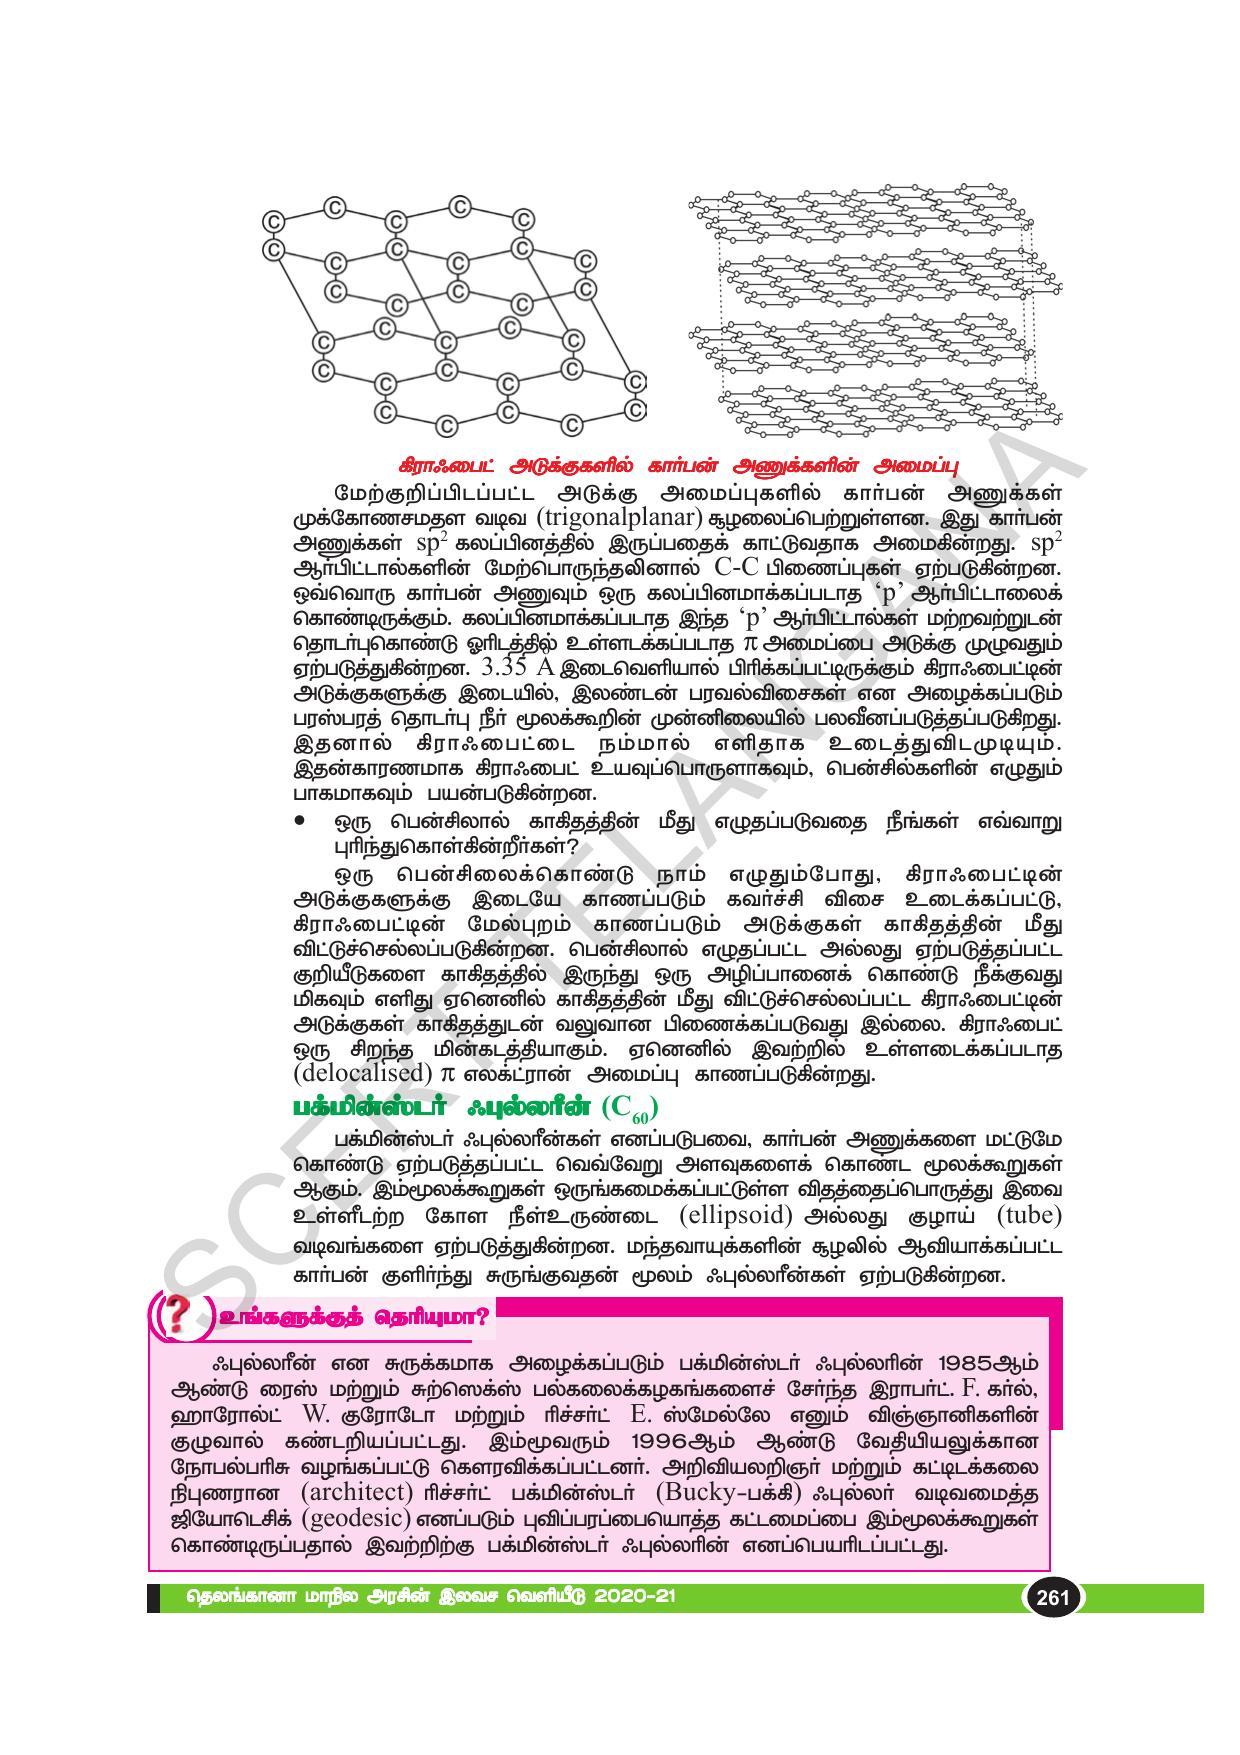 TS SCERT Class 10 Physical Science(Tamil Medium) Text Book - Page 273